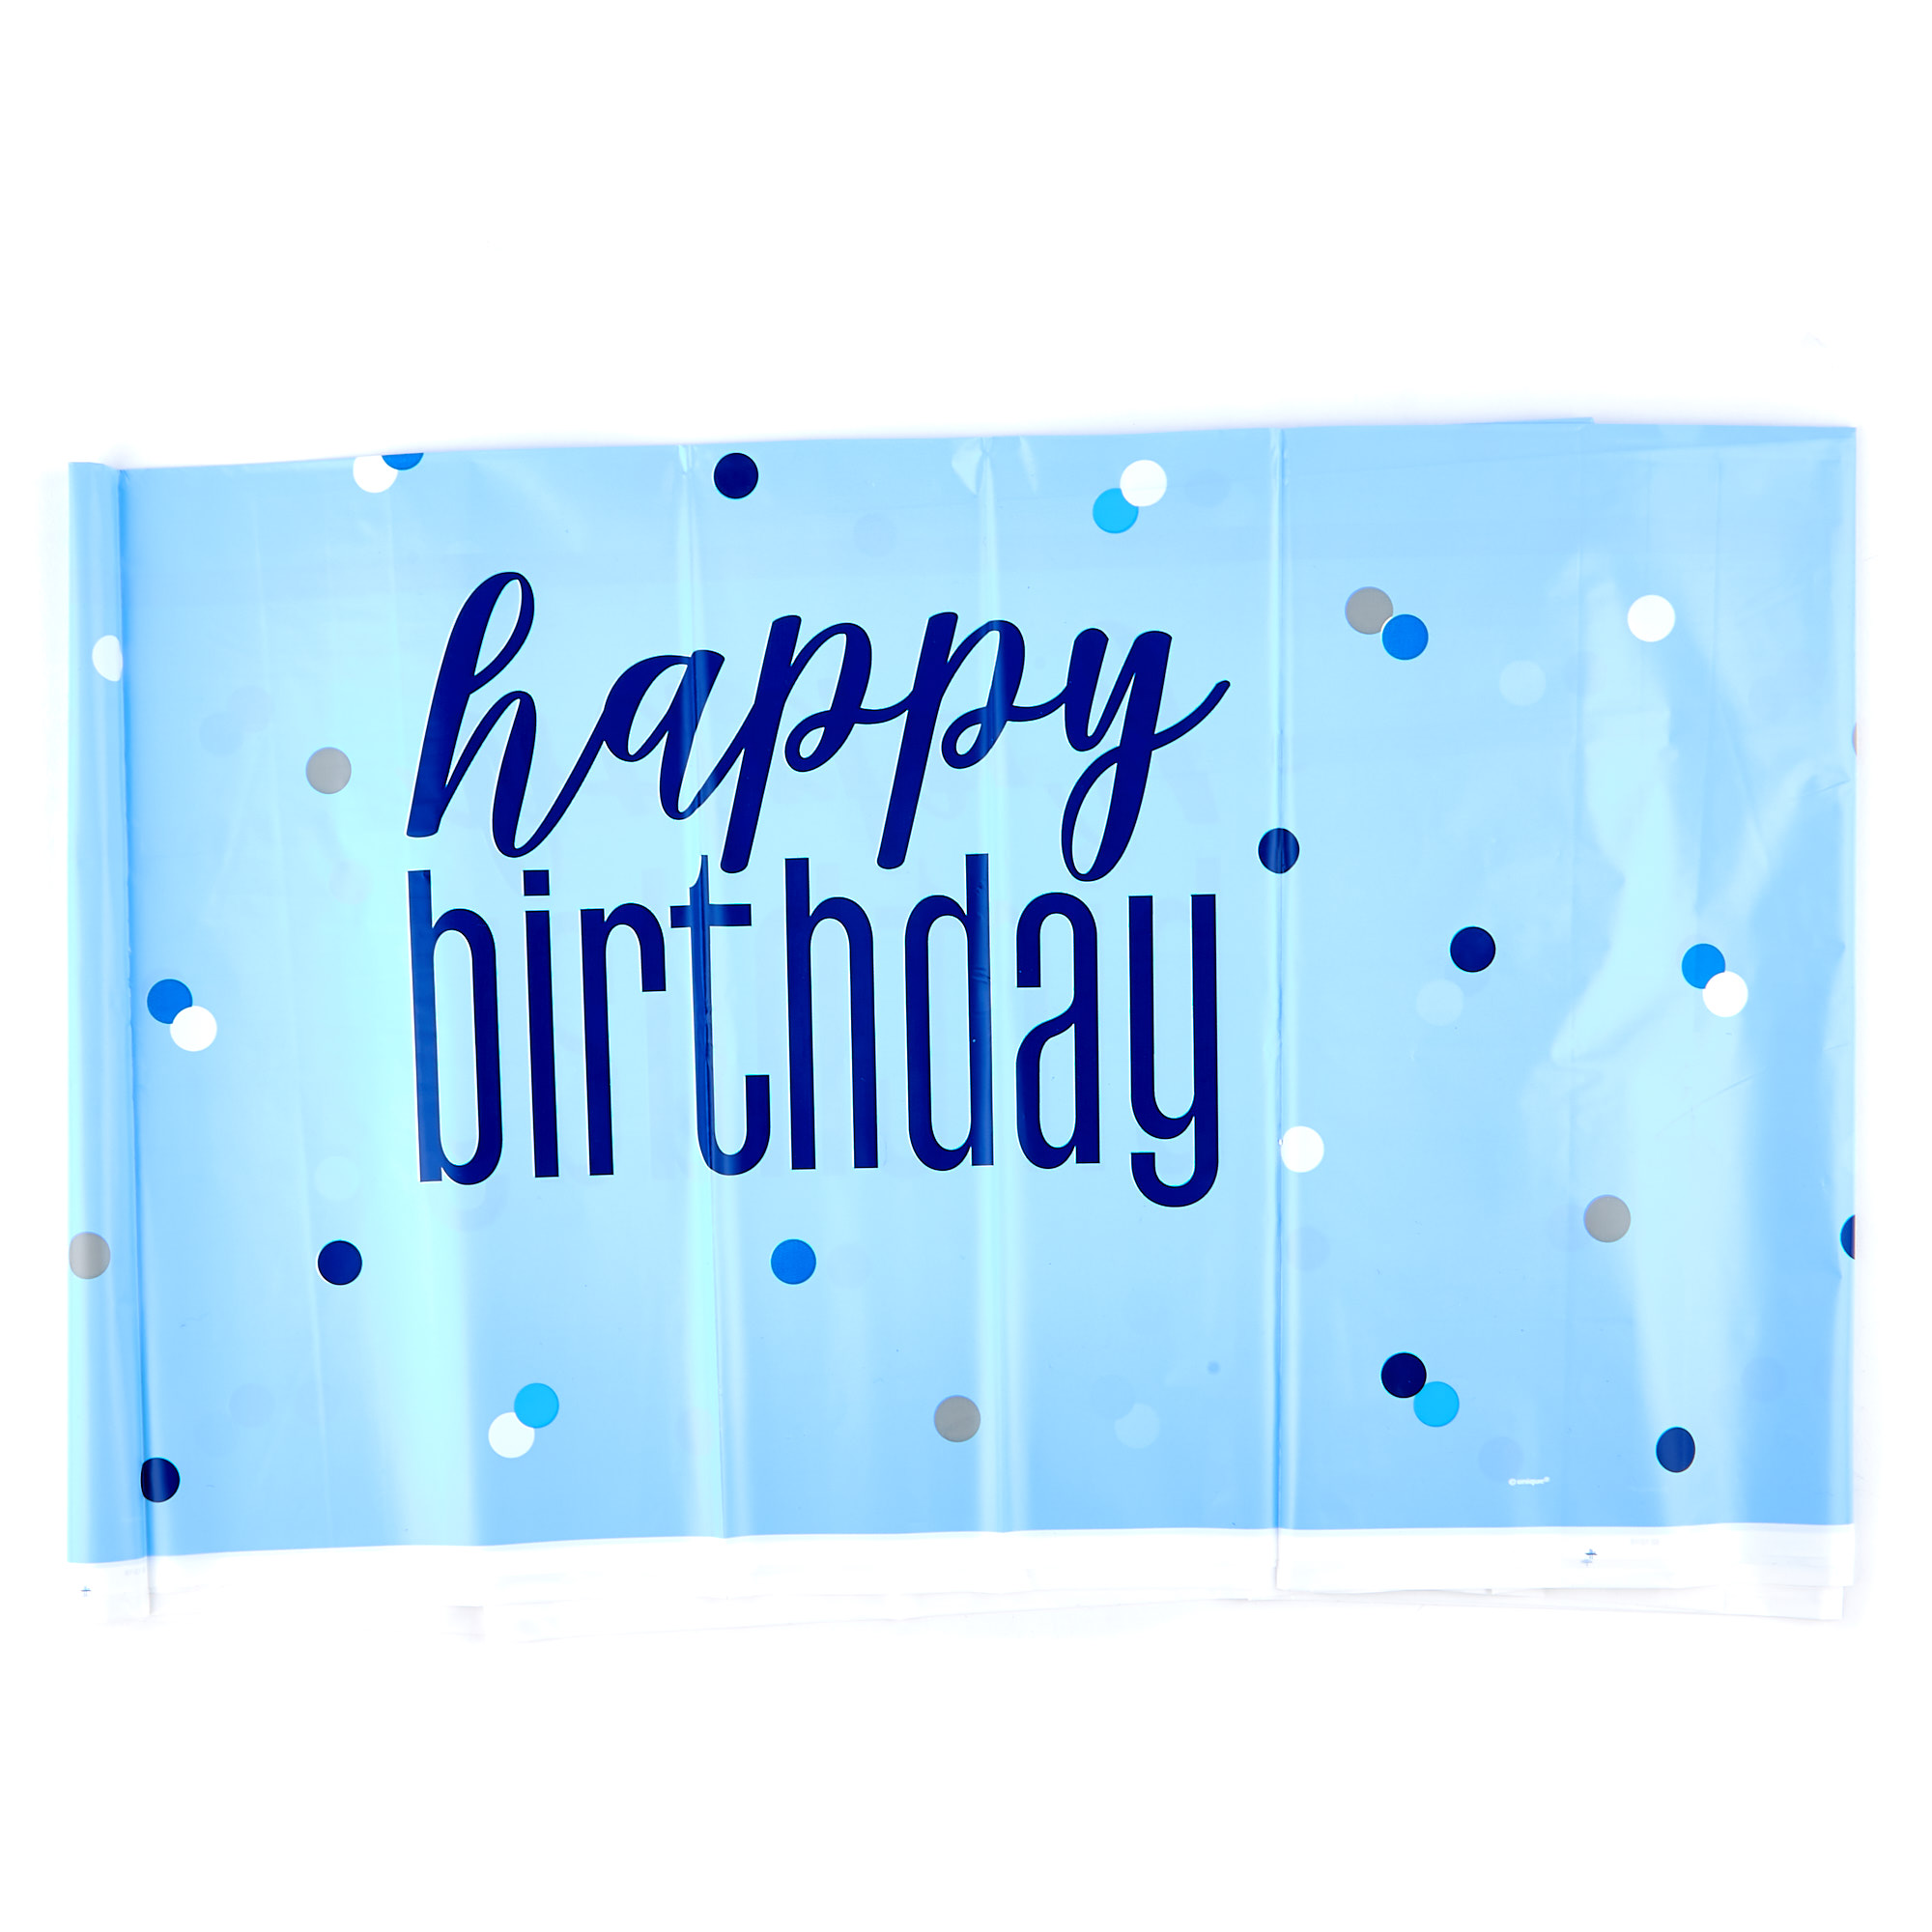 Blue 30th Birthday Party Tableware & Decorations Bundle - 16 Guests